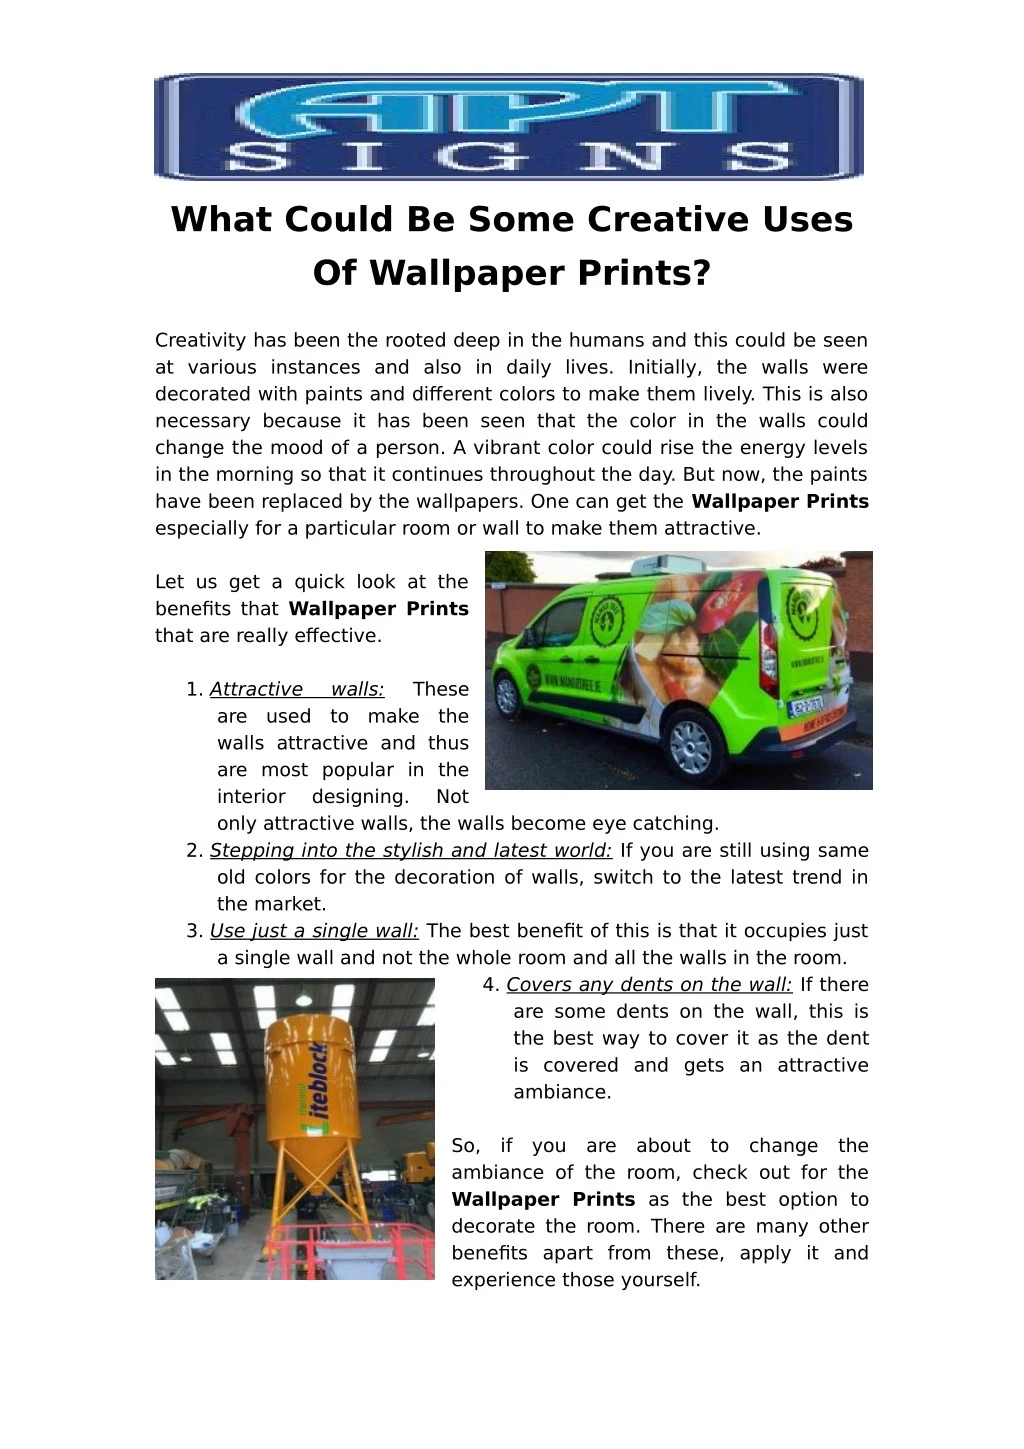 what could be some creative uses of wallpaper